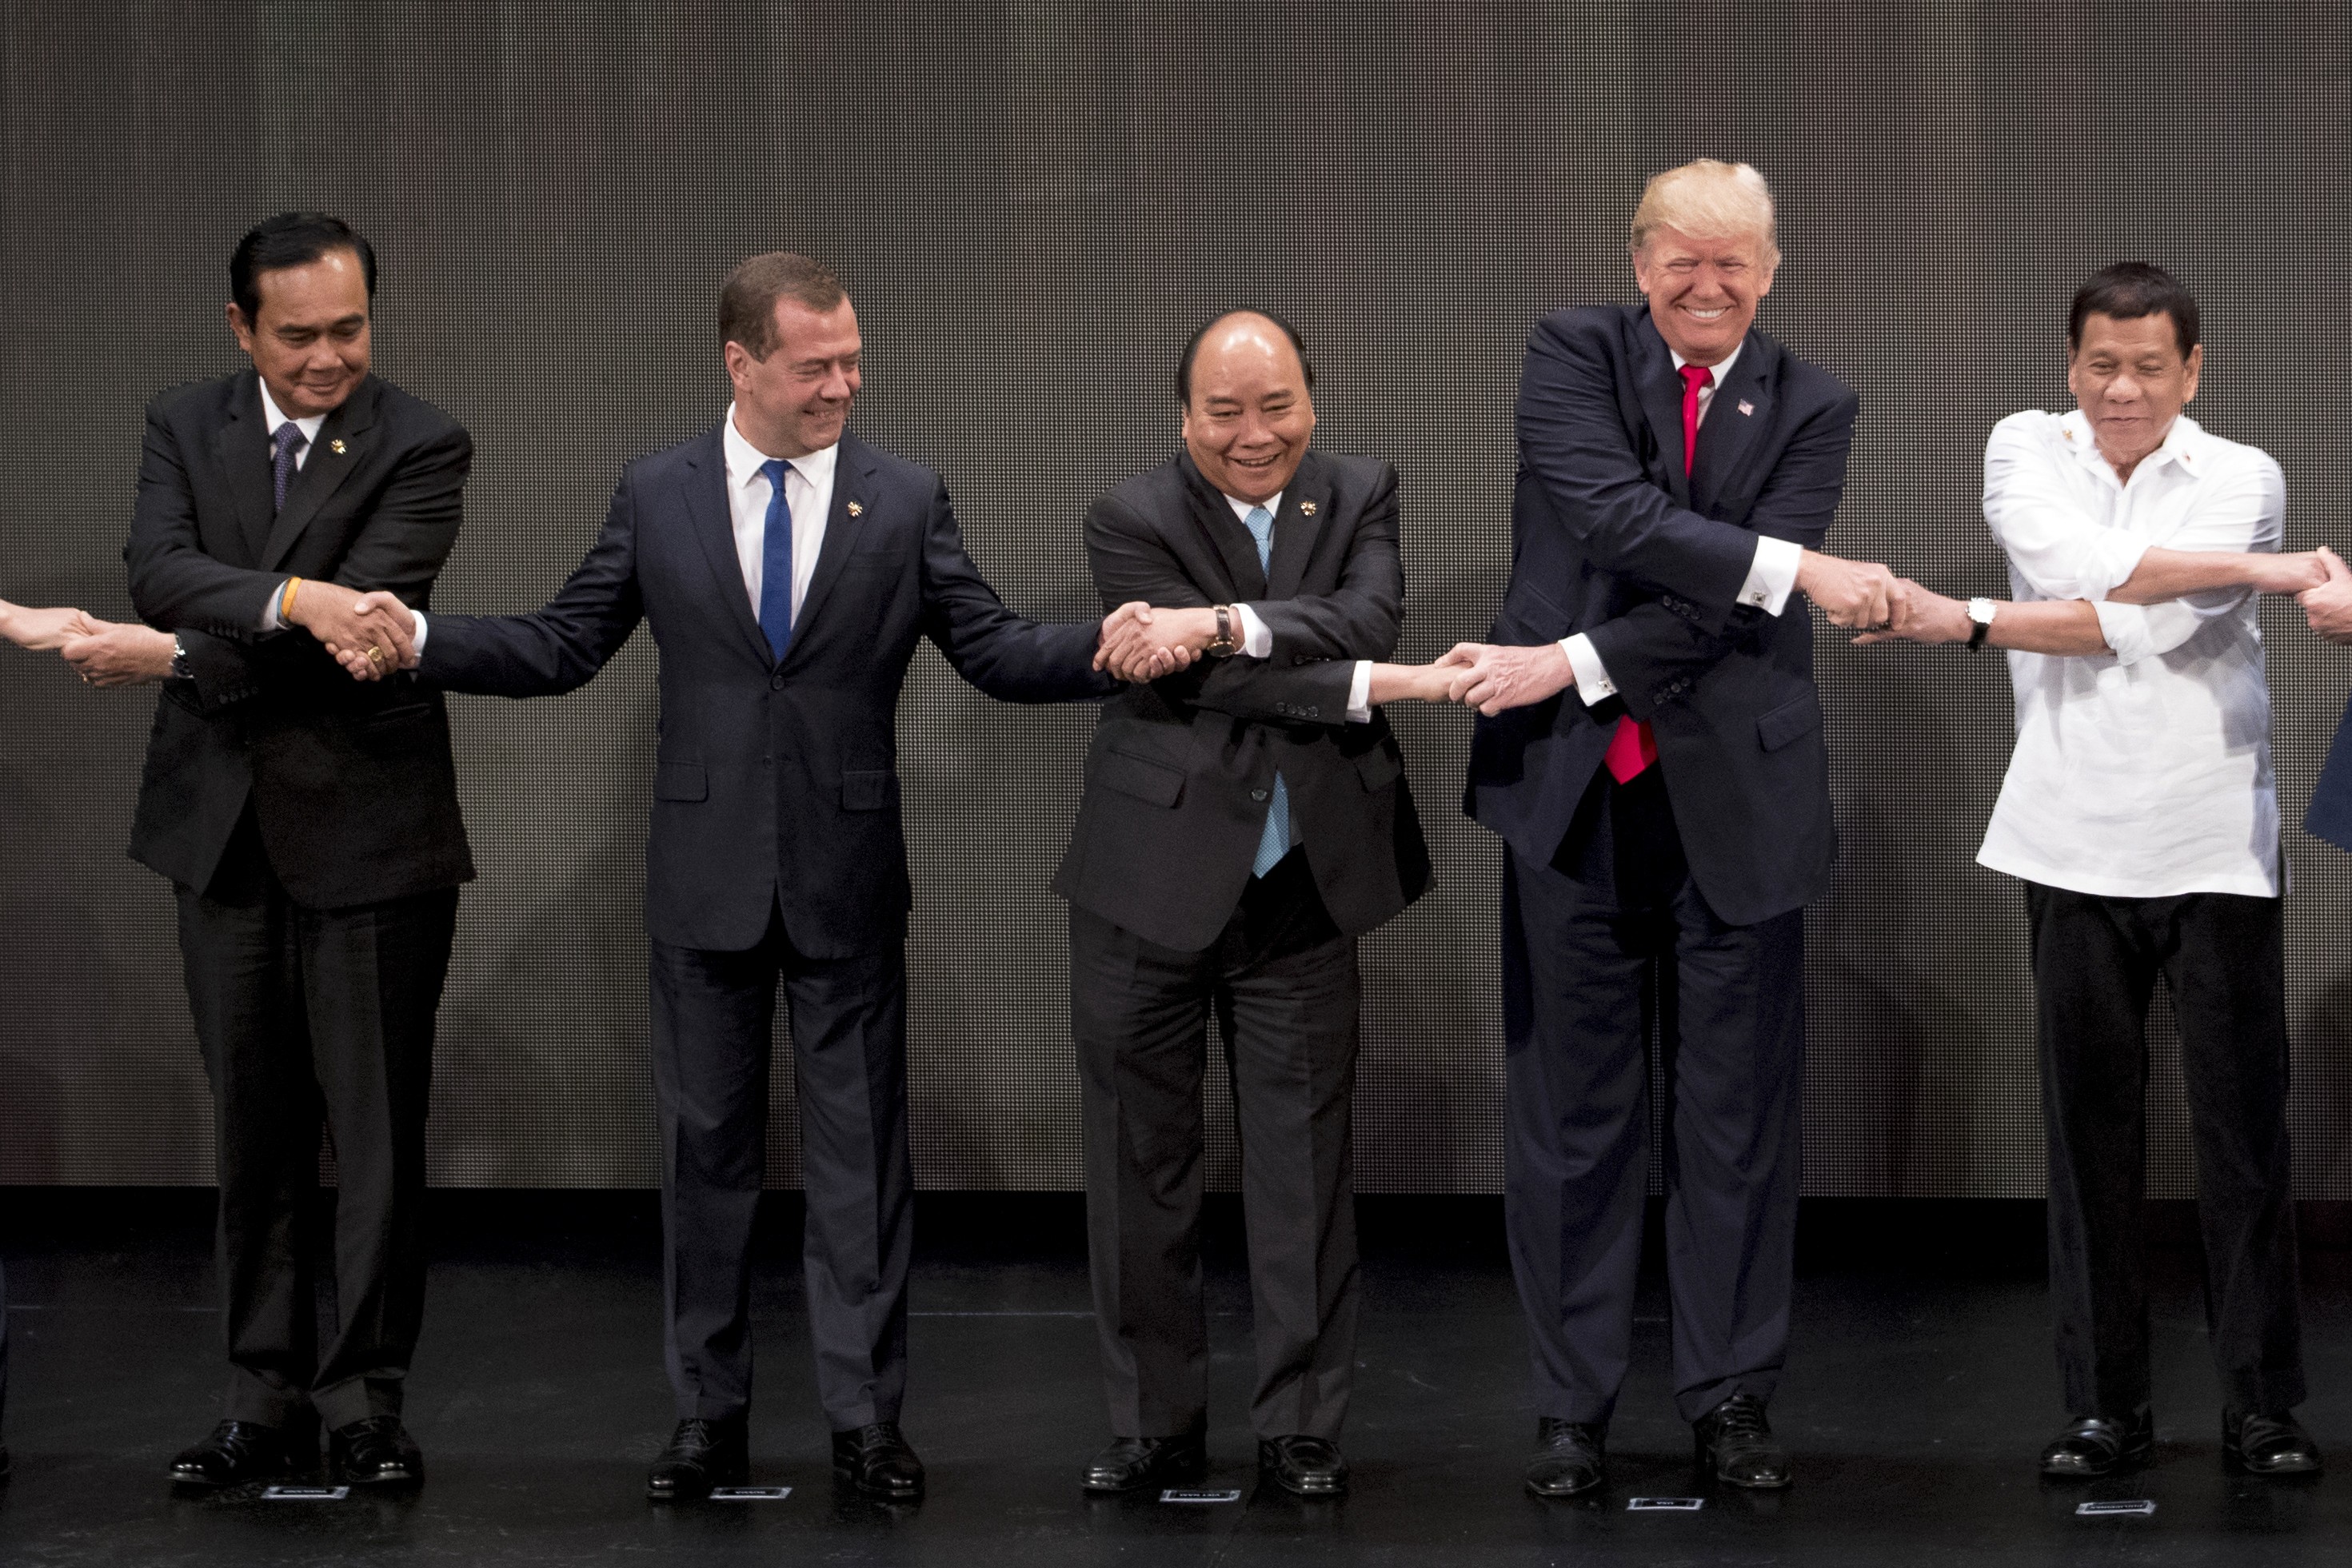 Vietnamese Prime Minister Nguyen Xhan Phuc (centre) joins hands with (from left) Thai Prime Minster Prayuth Chan-ocha, Russian Prime Minister Dmitry Medvedev, US President Donald Trump, and Philippine President Rodrigo Duterte in the “Asean-way handshake” on November 13 in Manila, at the opening ceremony for the Asean Summit. Photo: AP